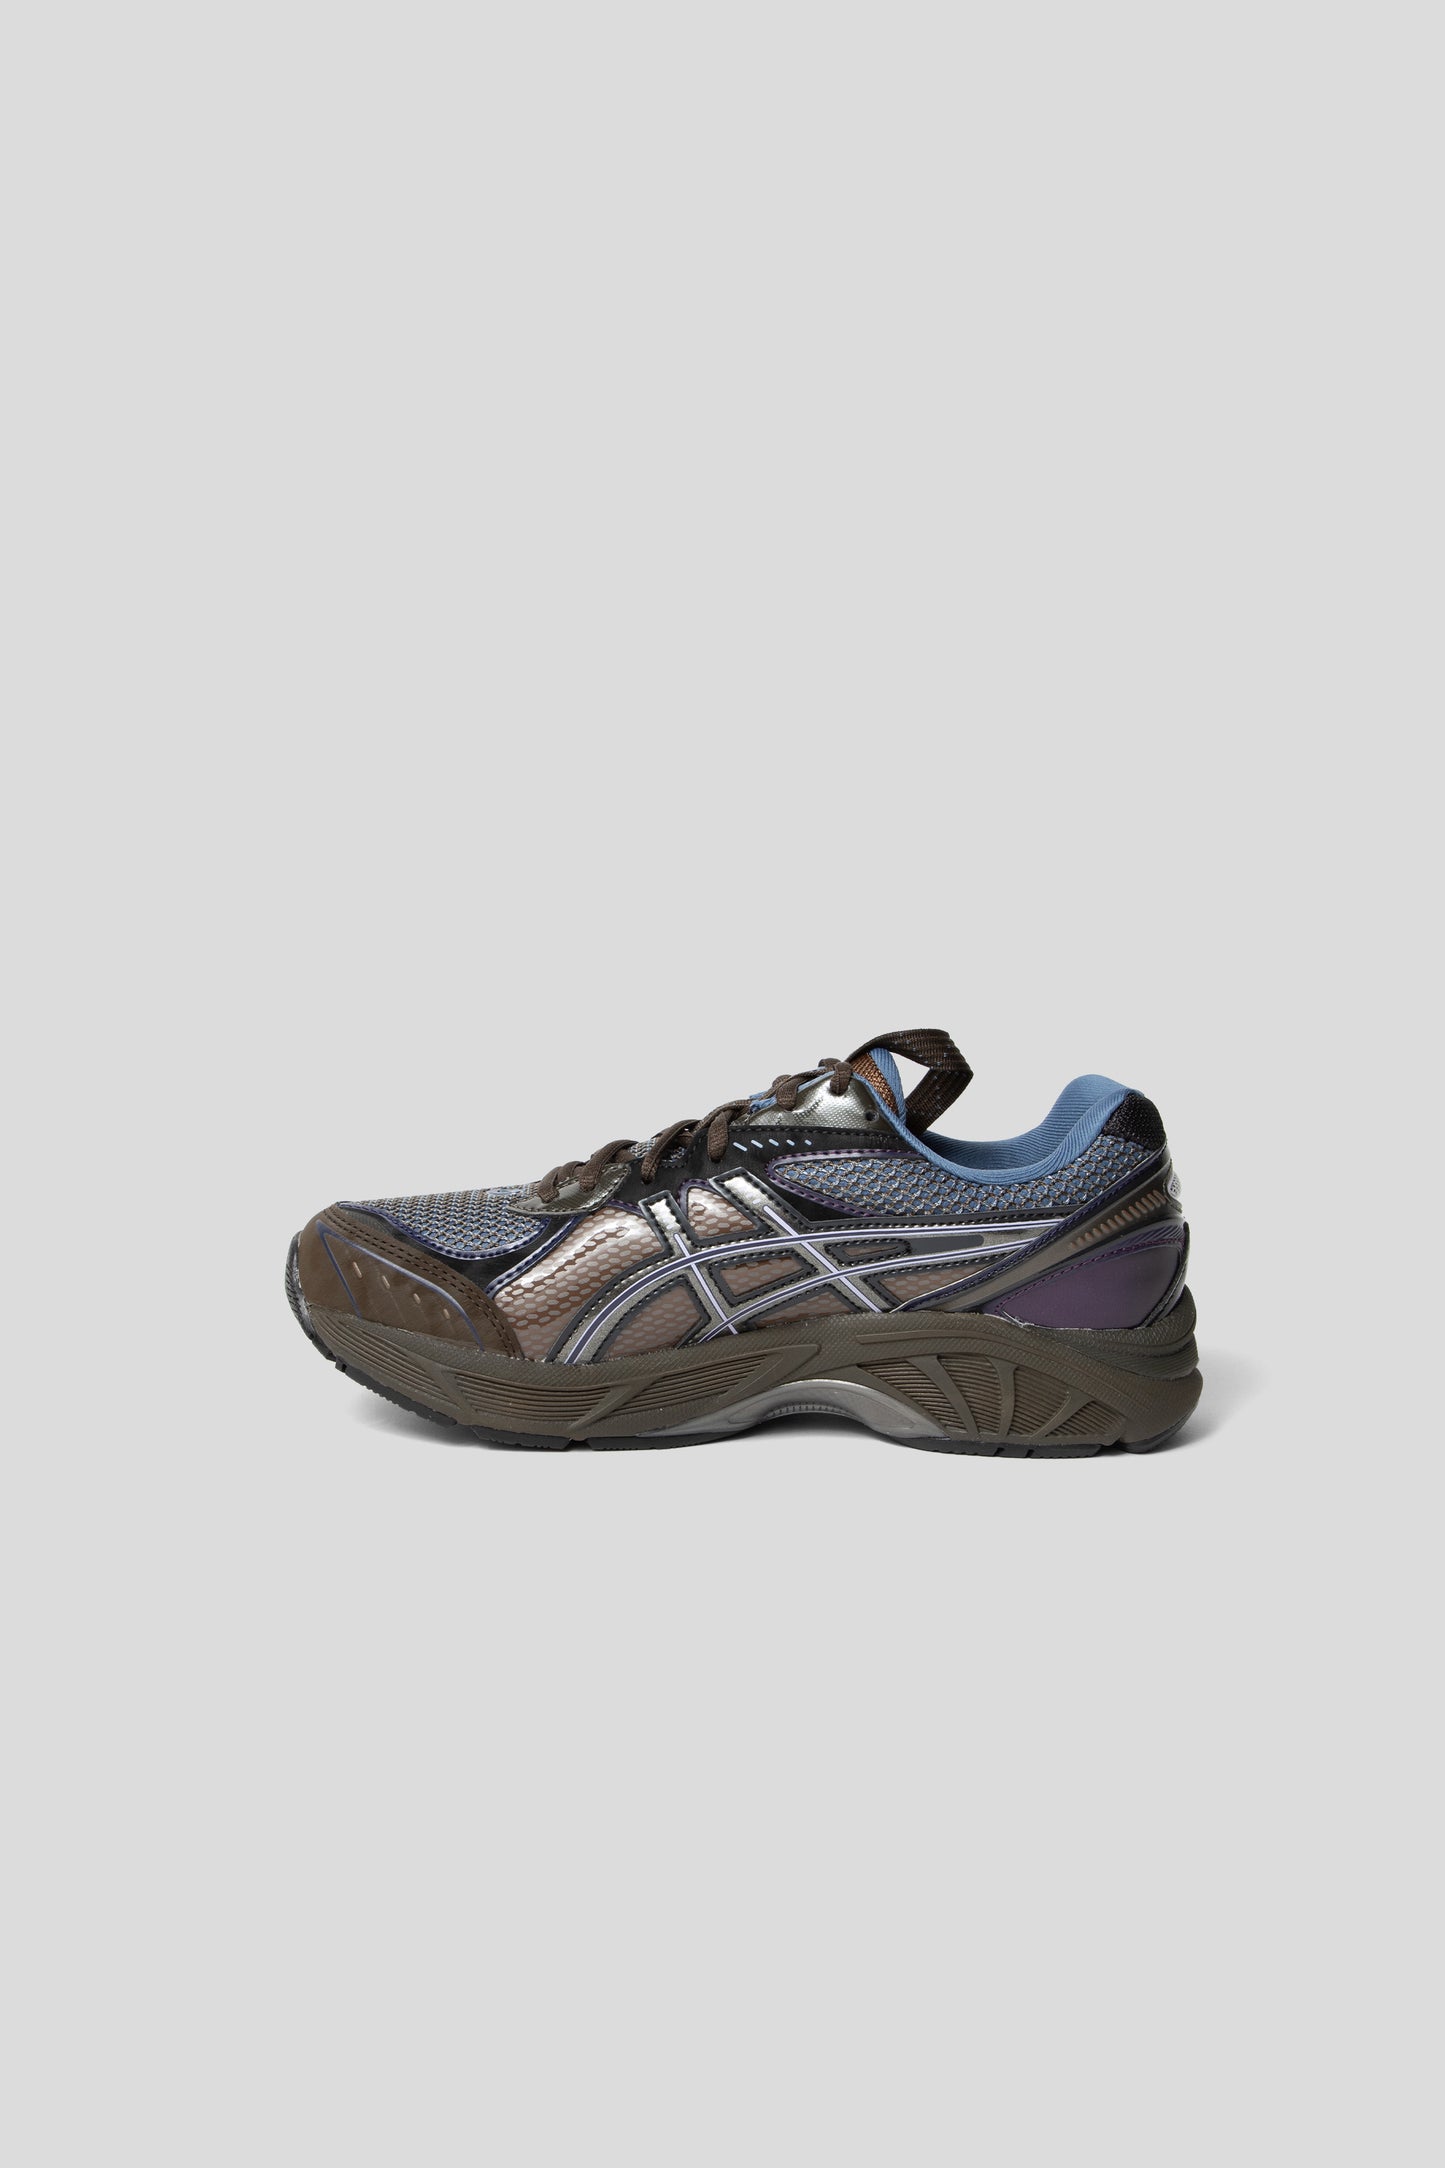 Asics UB6-S GT-2160 in Grey Floss and Brown.